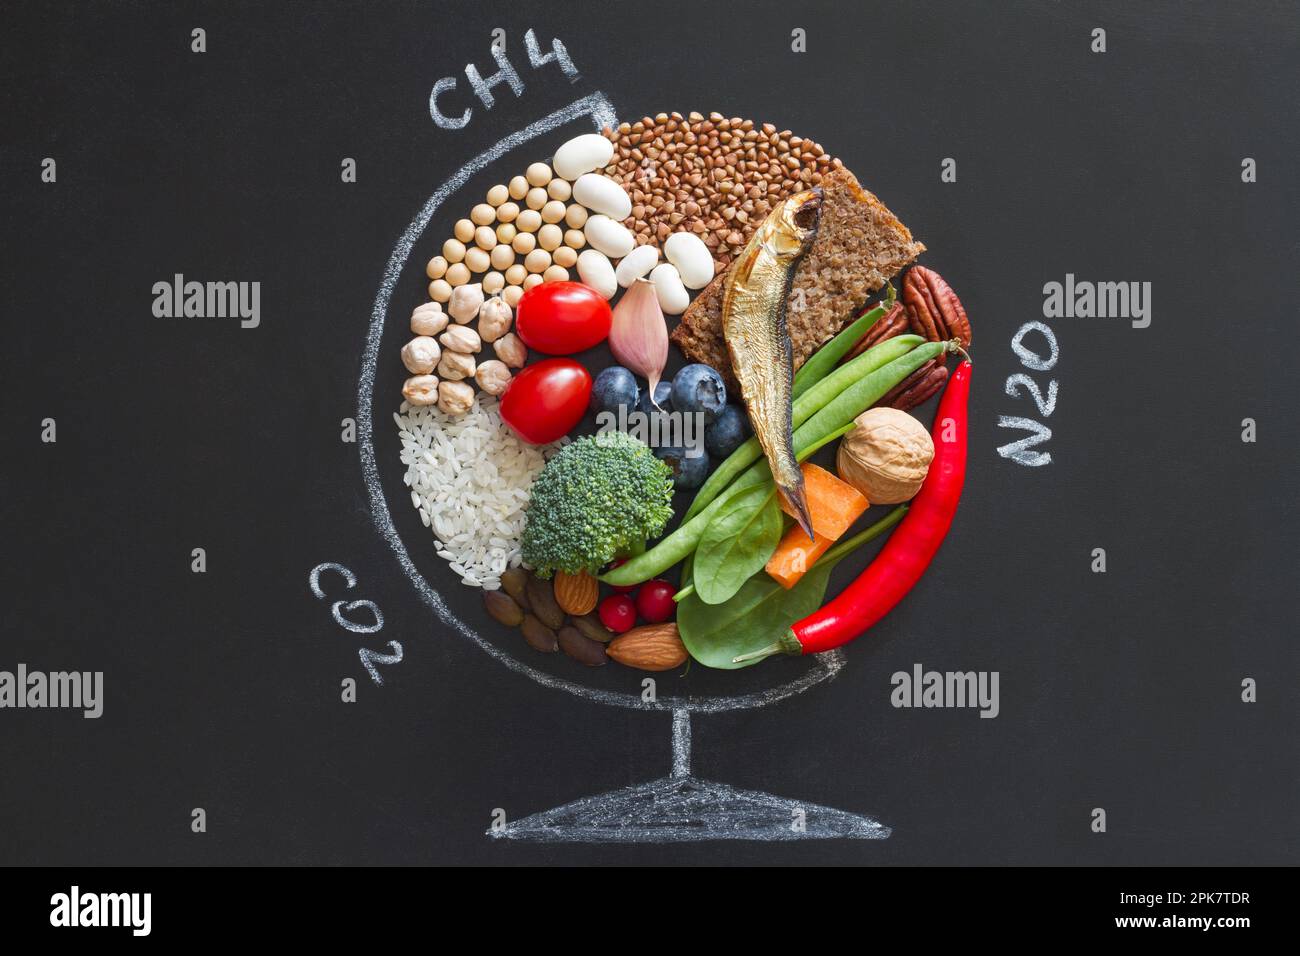 Food products good for health and planet, globe abstraction with greenhouse gases on chalkboard, planetary health diet concept Stock Photo